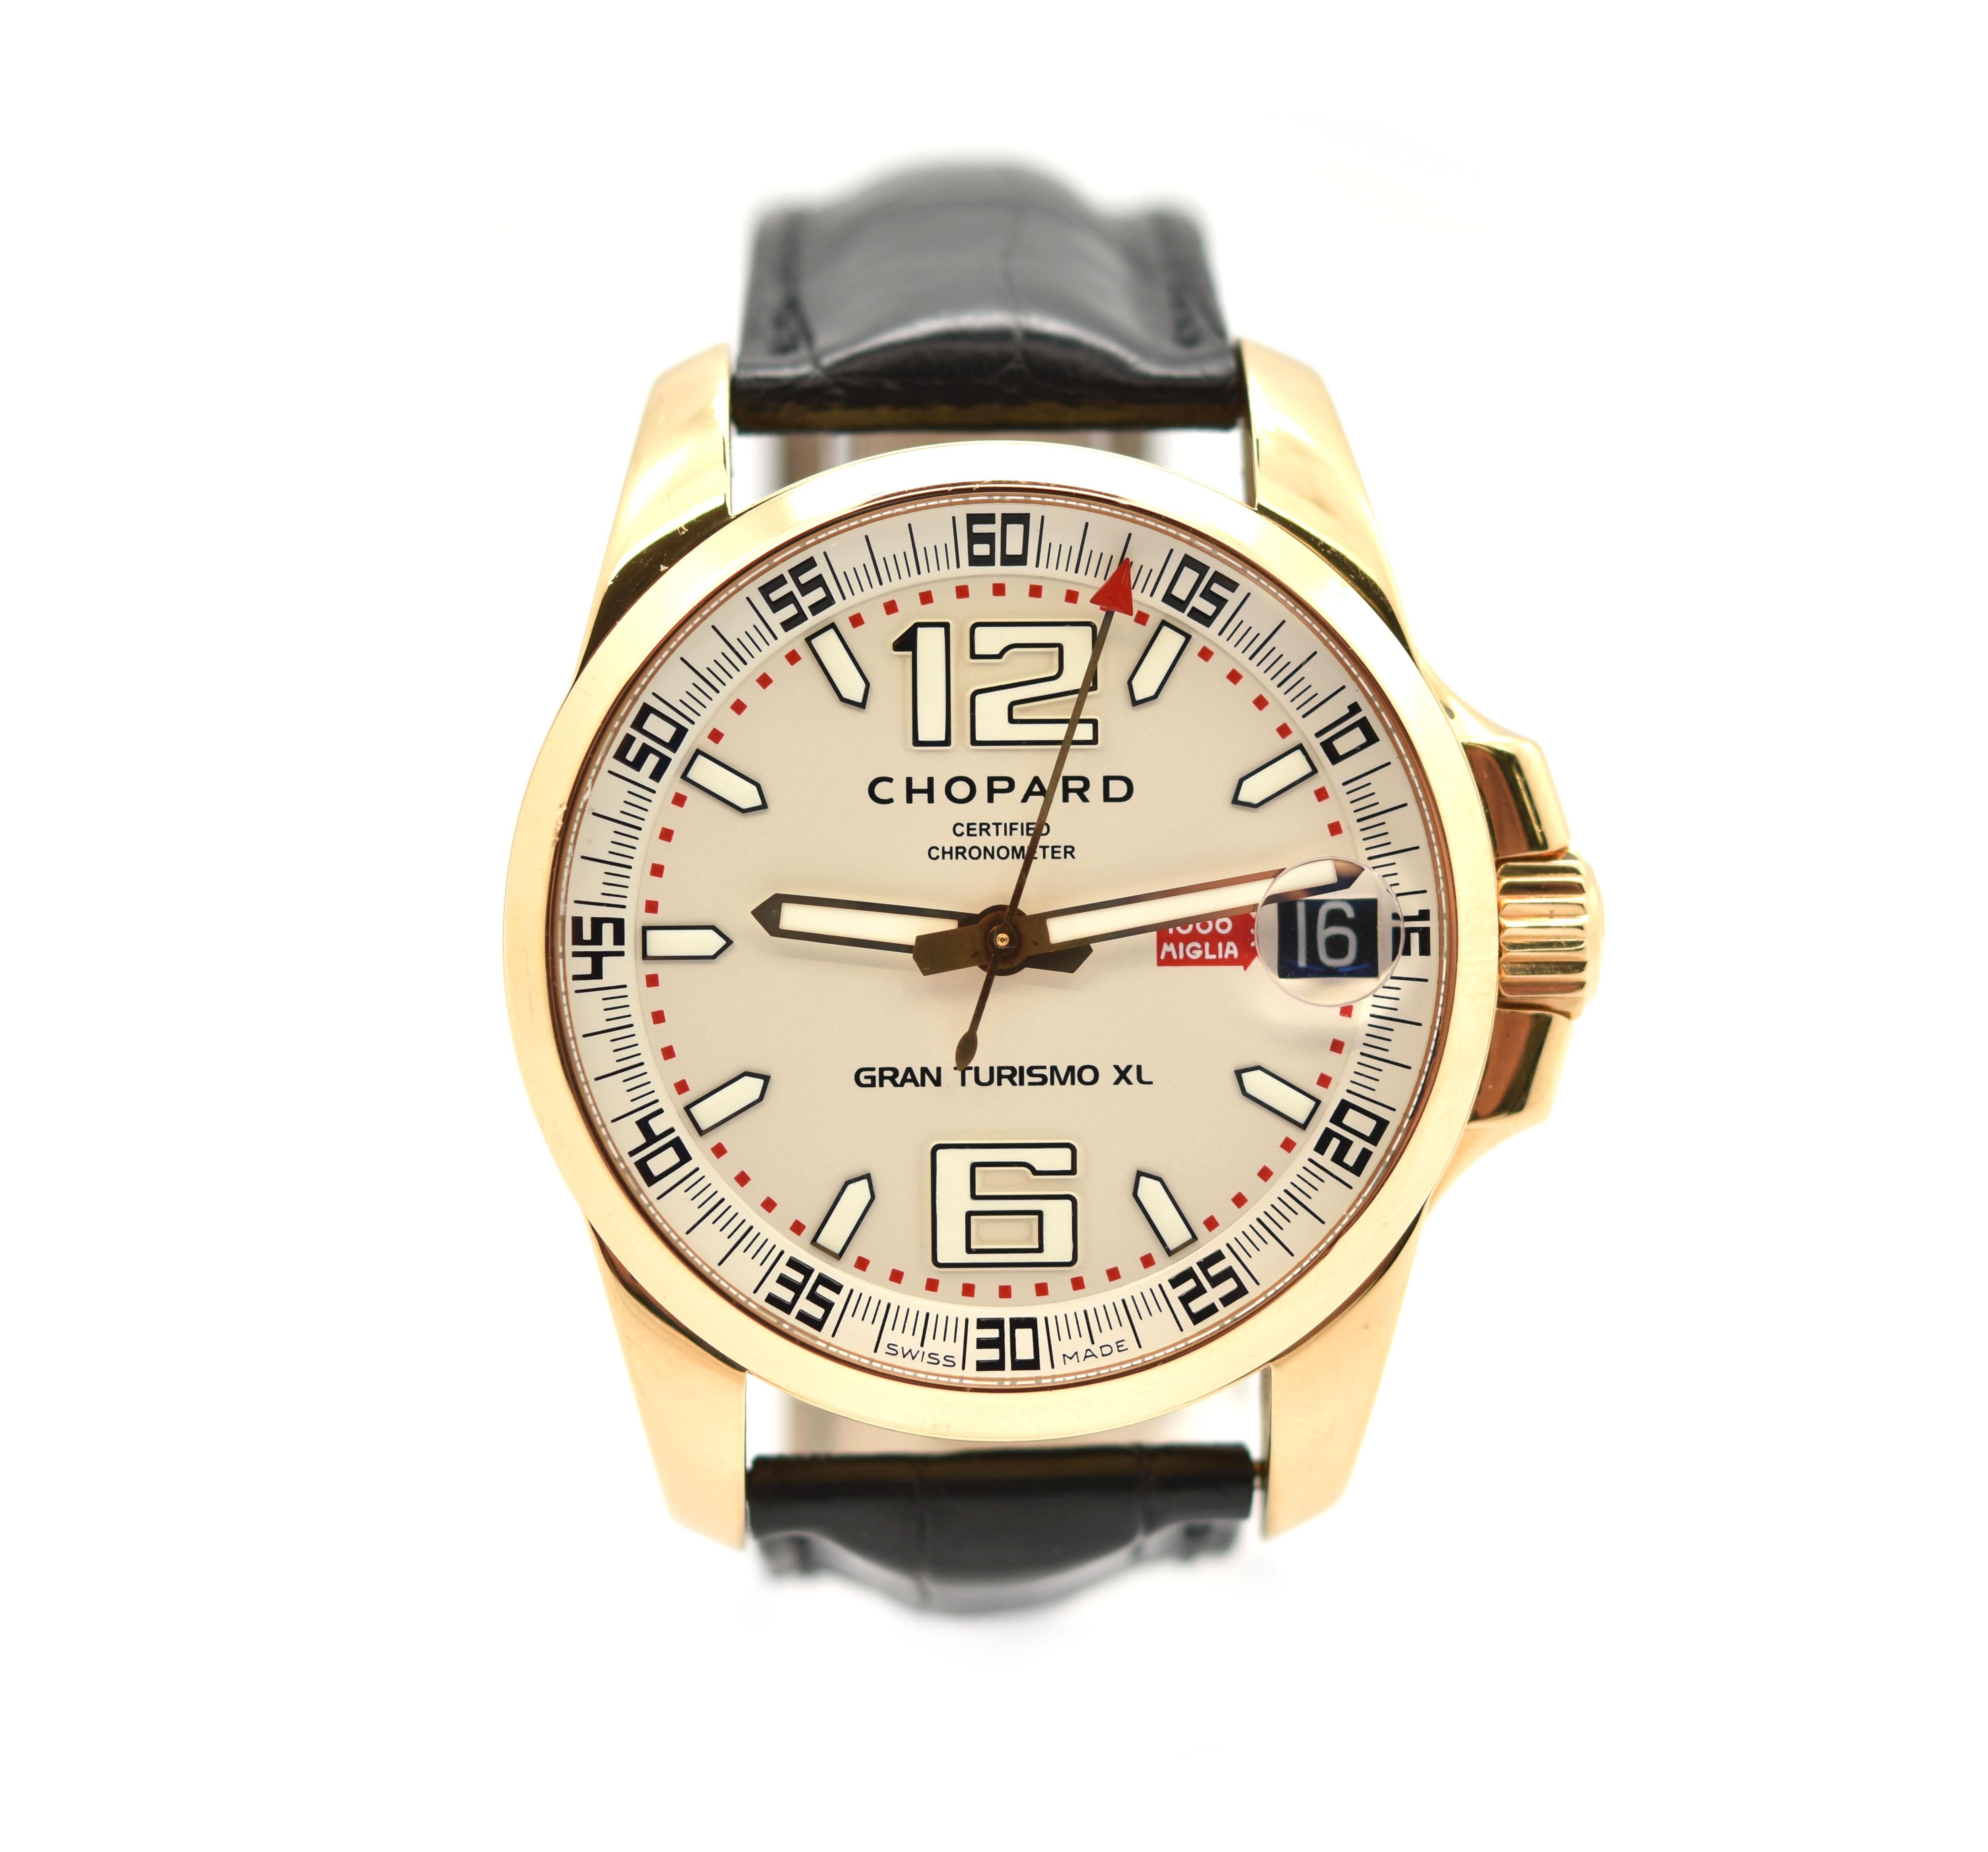 Movement: automatic
Function: hours, minutes, sweep seconds, date
Case: 43mm 18k rose gold case, sapphire crystal
Band: Chopard black leather strap with original Chopard buckle
Dial: silvered dial, rose hands and hour markers
Reference #: